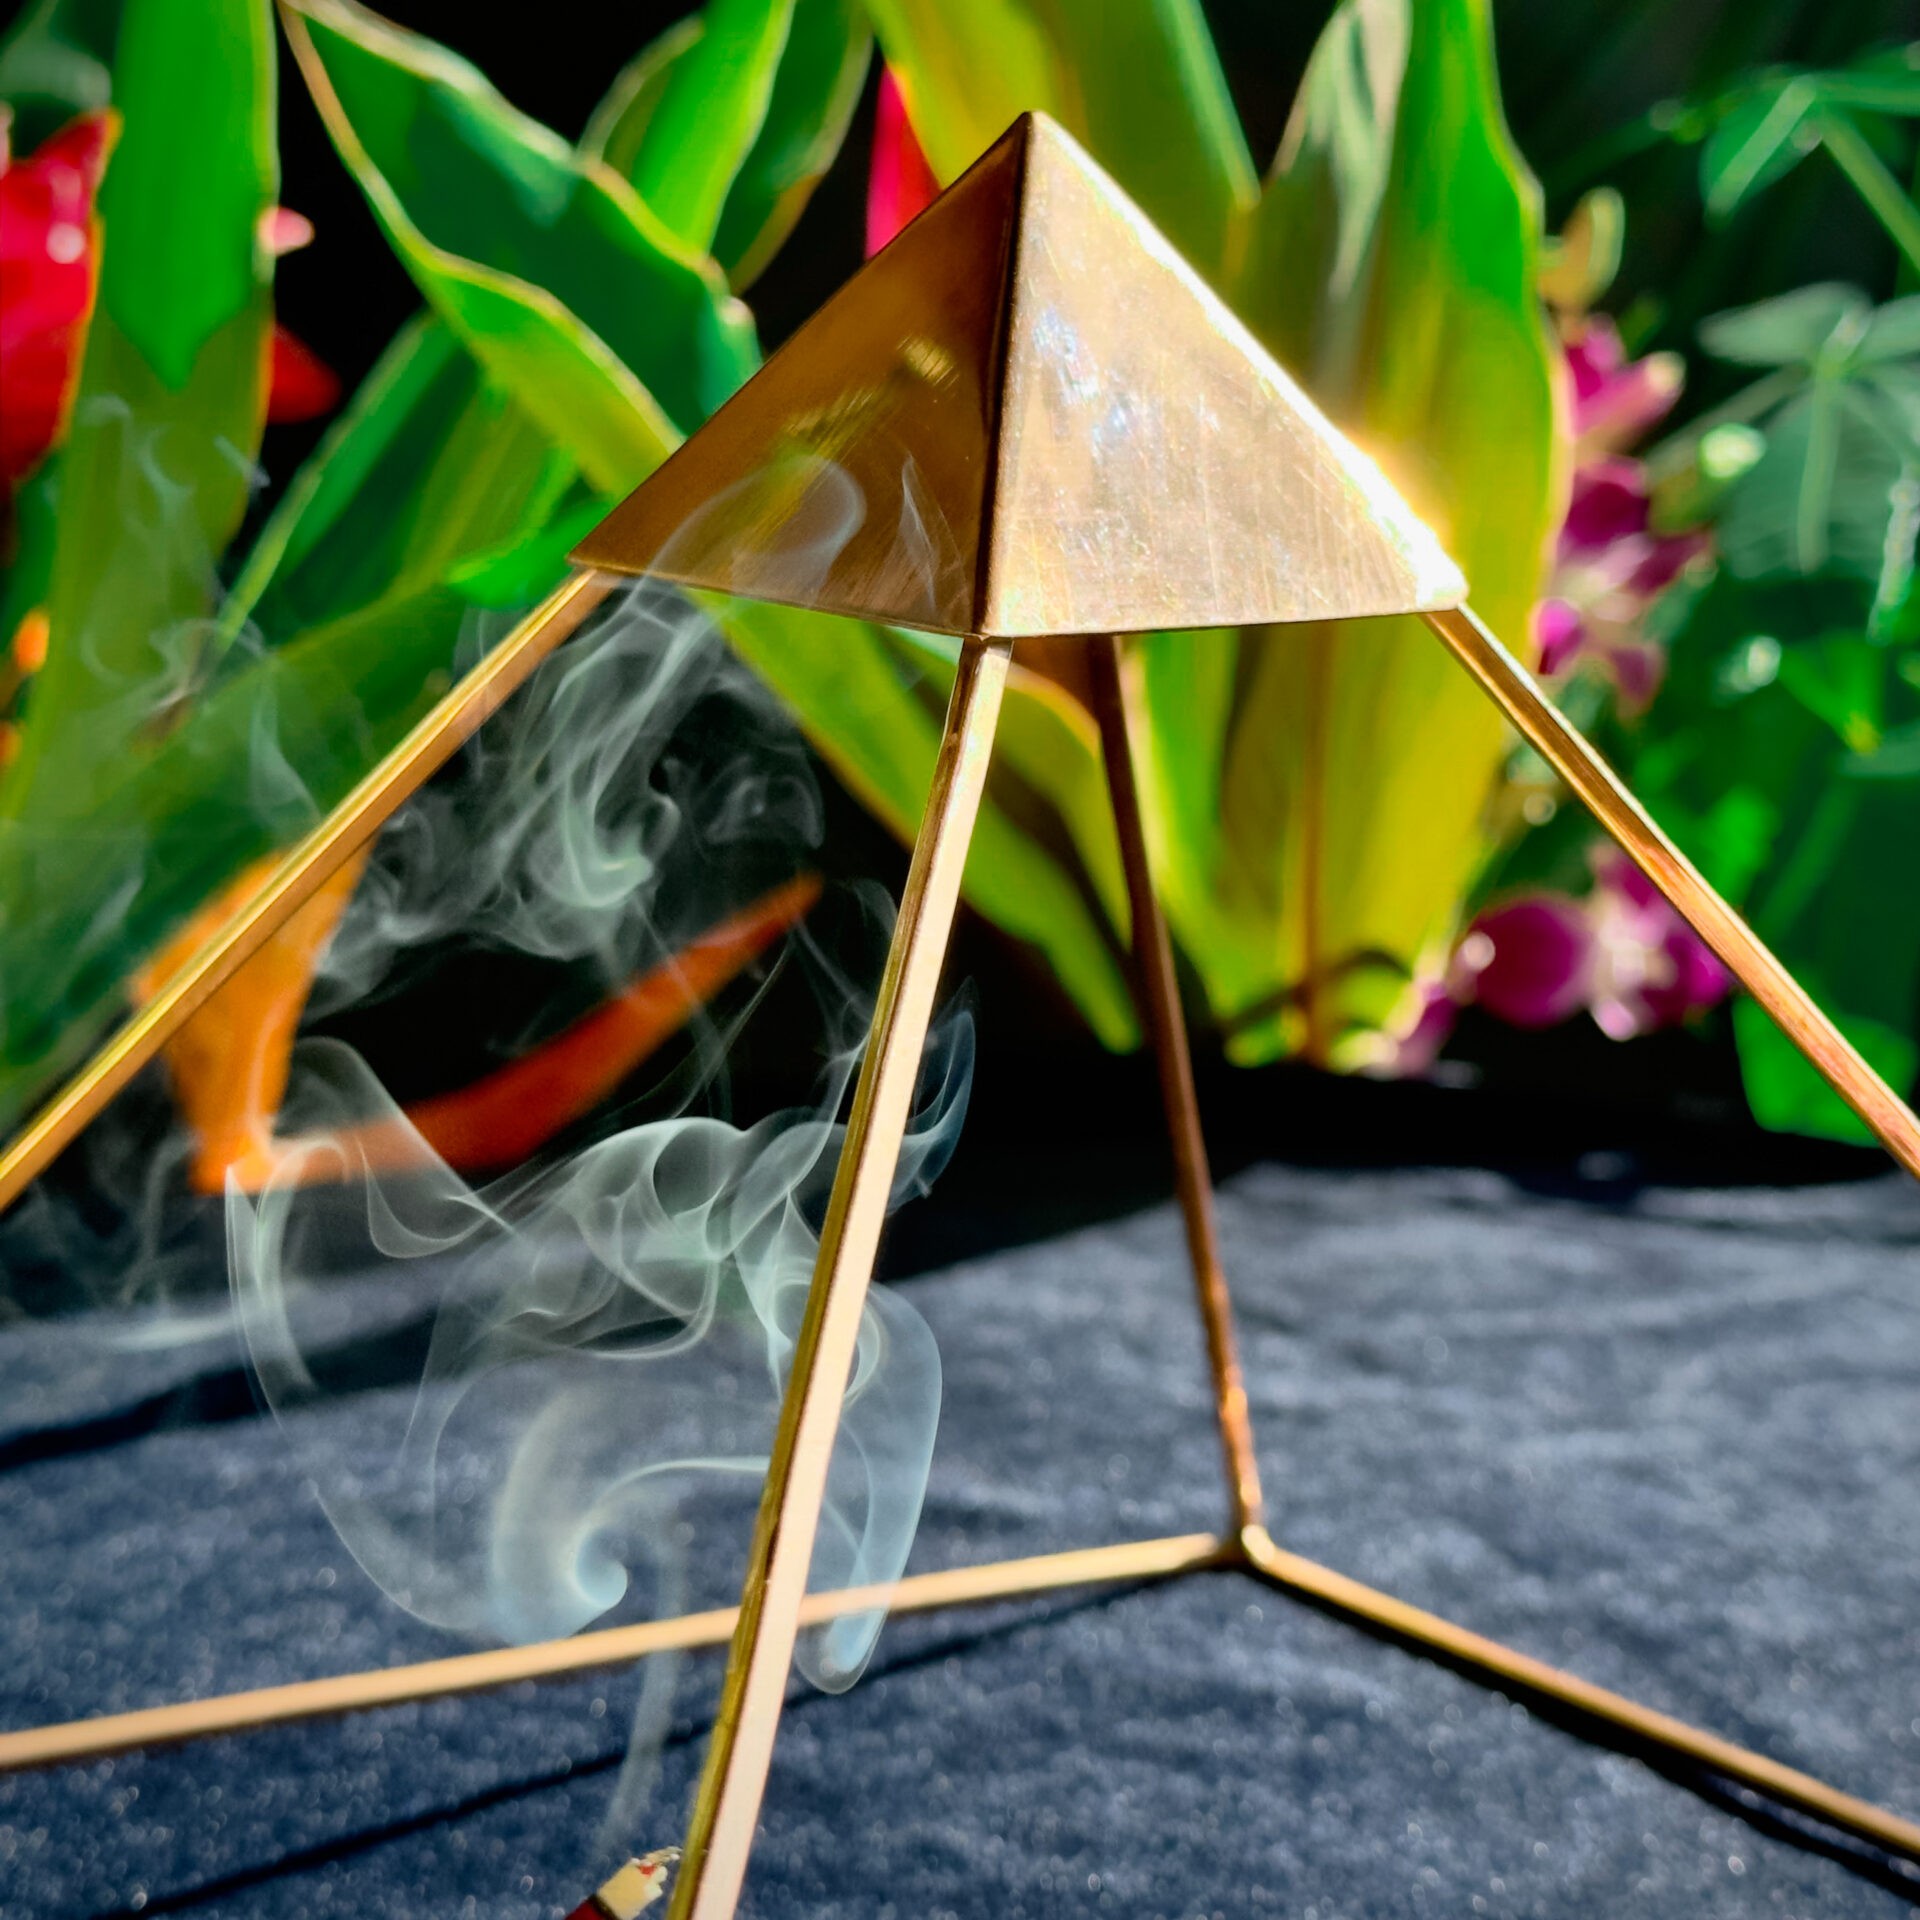 Sage Goddess Copper Pyramid for Conducting Energy Flow